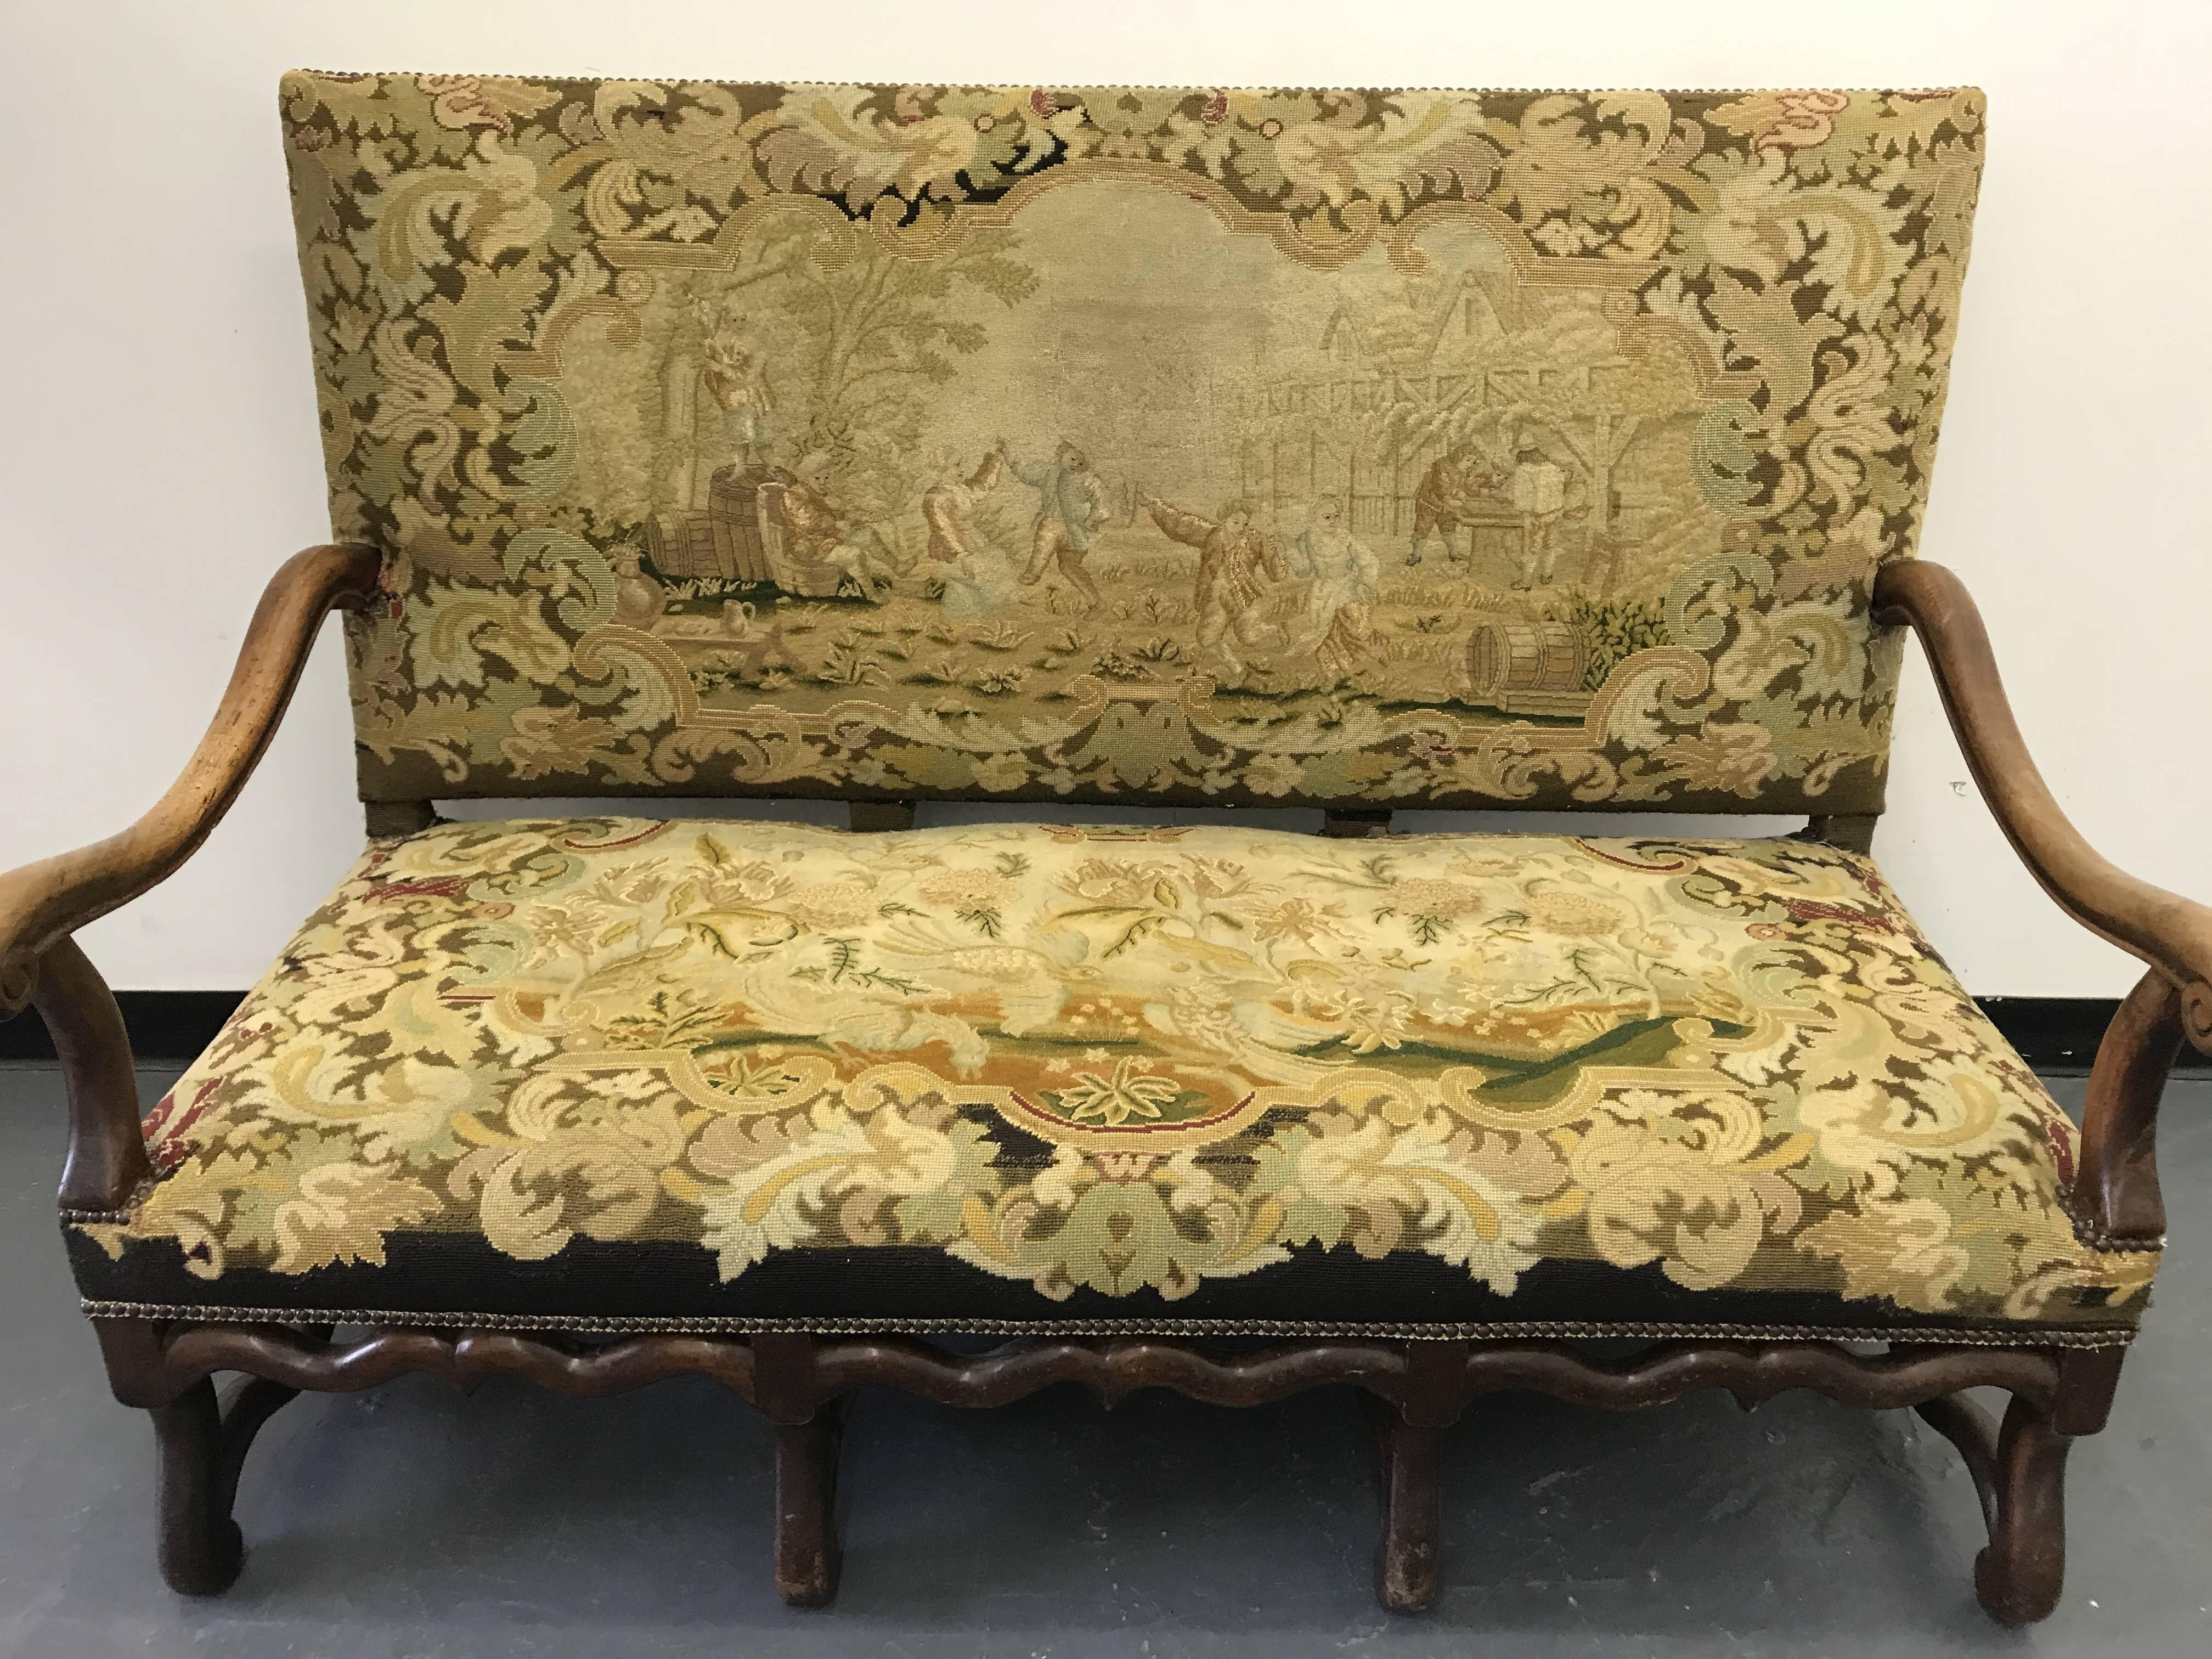 Antique 19th Century Needlepoint and Petit Point sofa. Sofa is in excellent condition. Needlepoint was completely removed, cleaned and fully restored and the entire insert was redone by upholster. Back of the sofa is finished with raw silk. Sofa